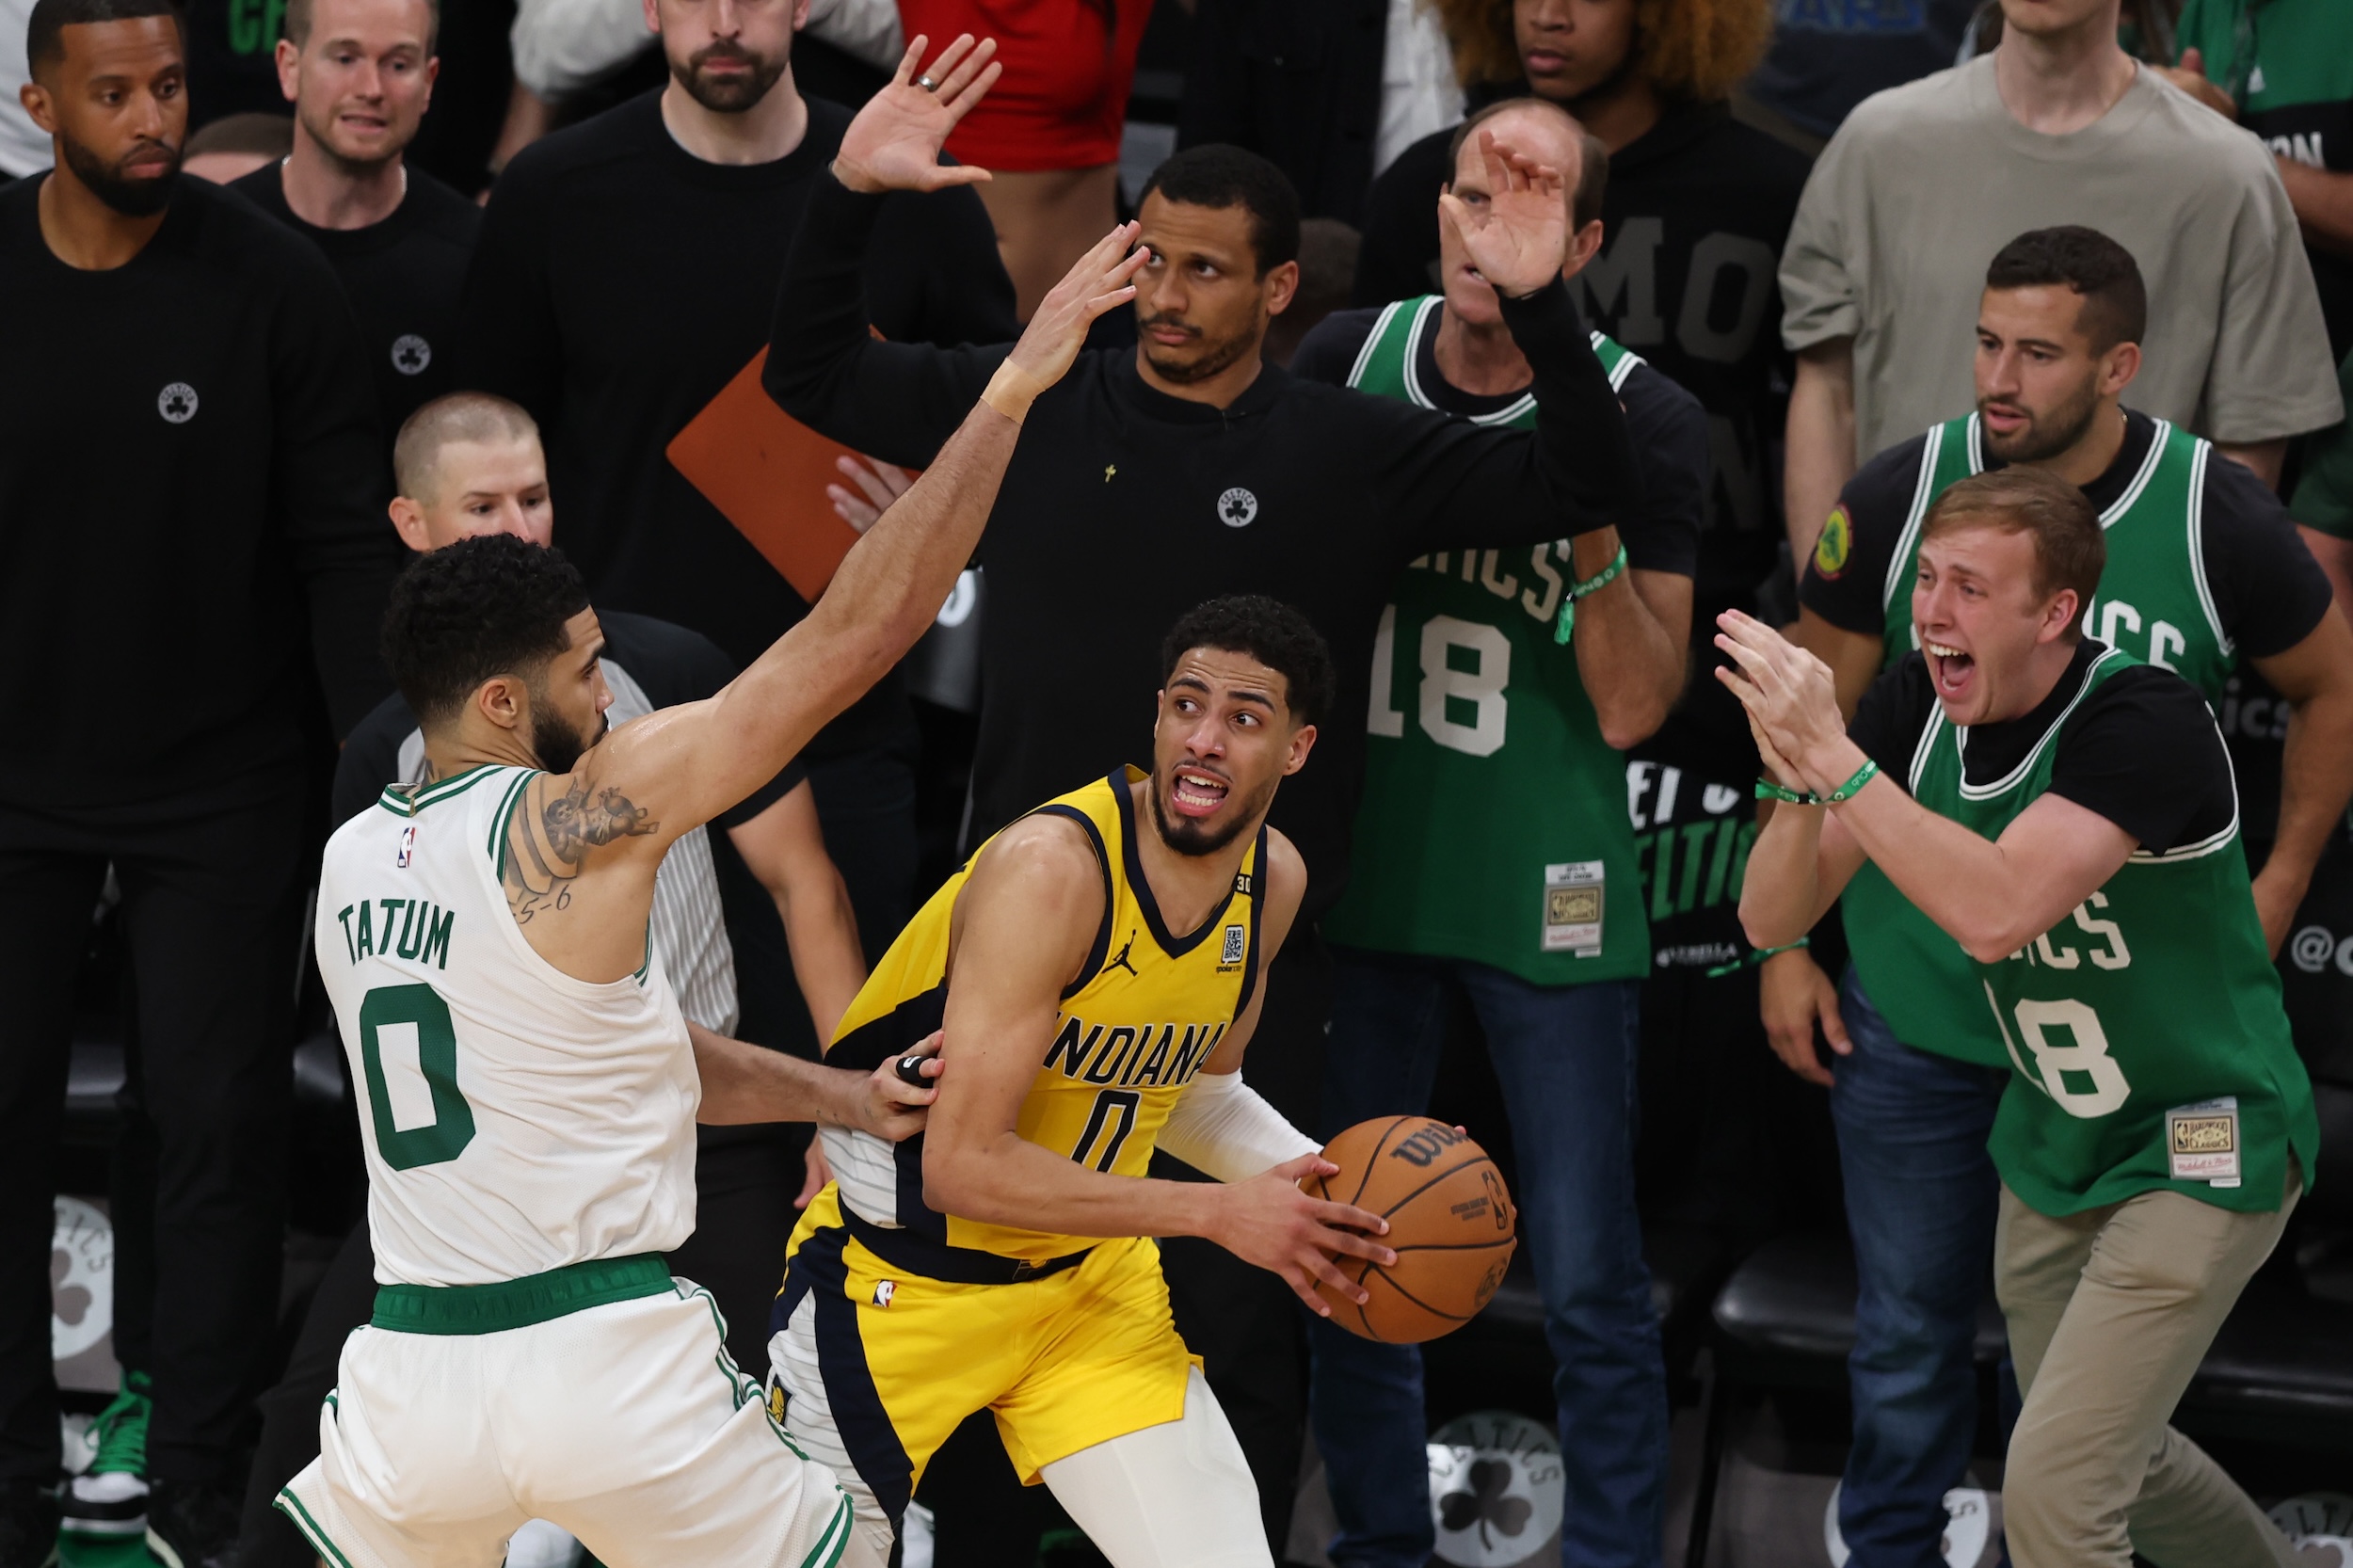 Tyrese Haliburton is hounded on the sideline by Jayson Tatum.